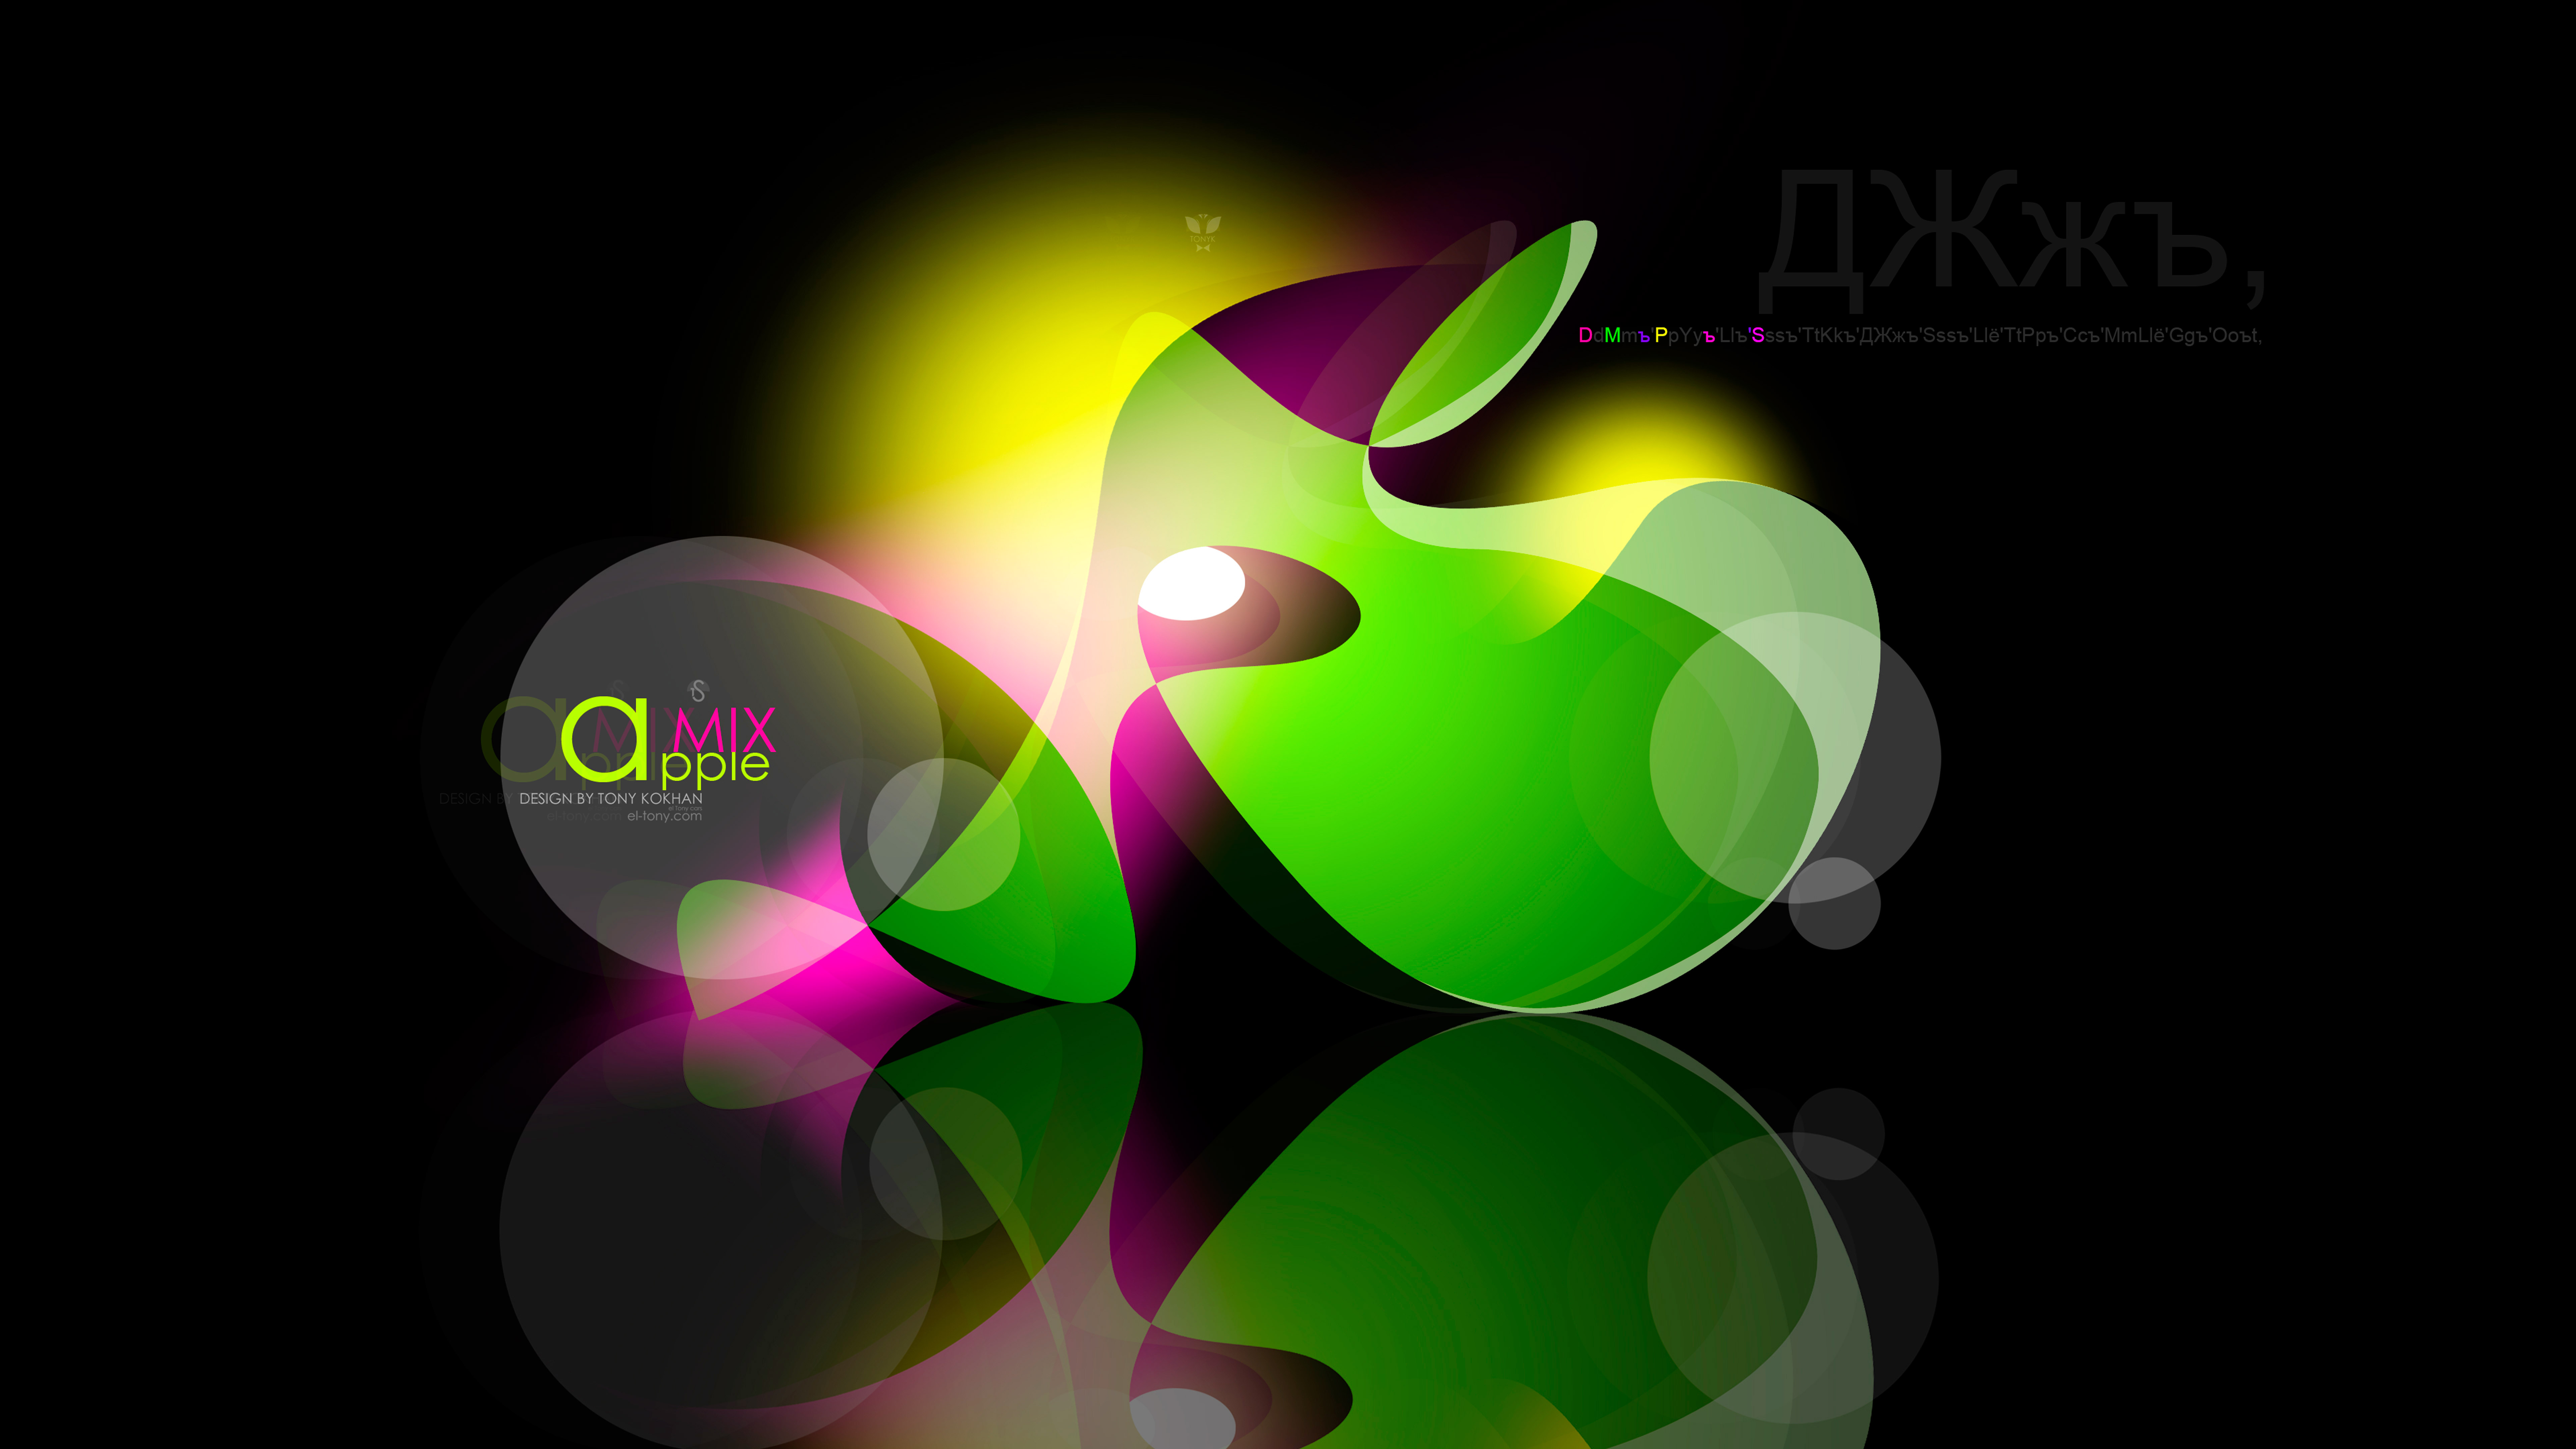 Apple-Mix-Super-Abstract-Simple-Creative-Word-Neural-Network-TonyCode-Style-Art